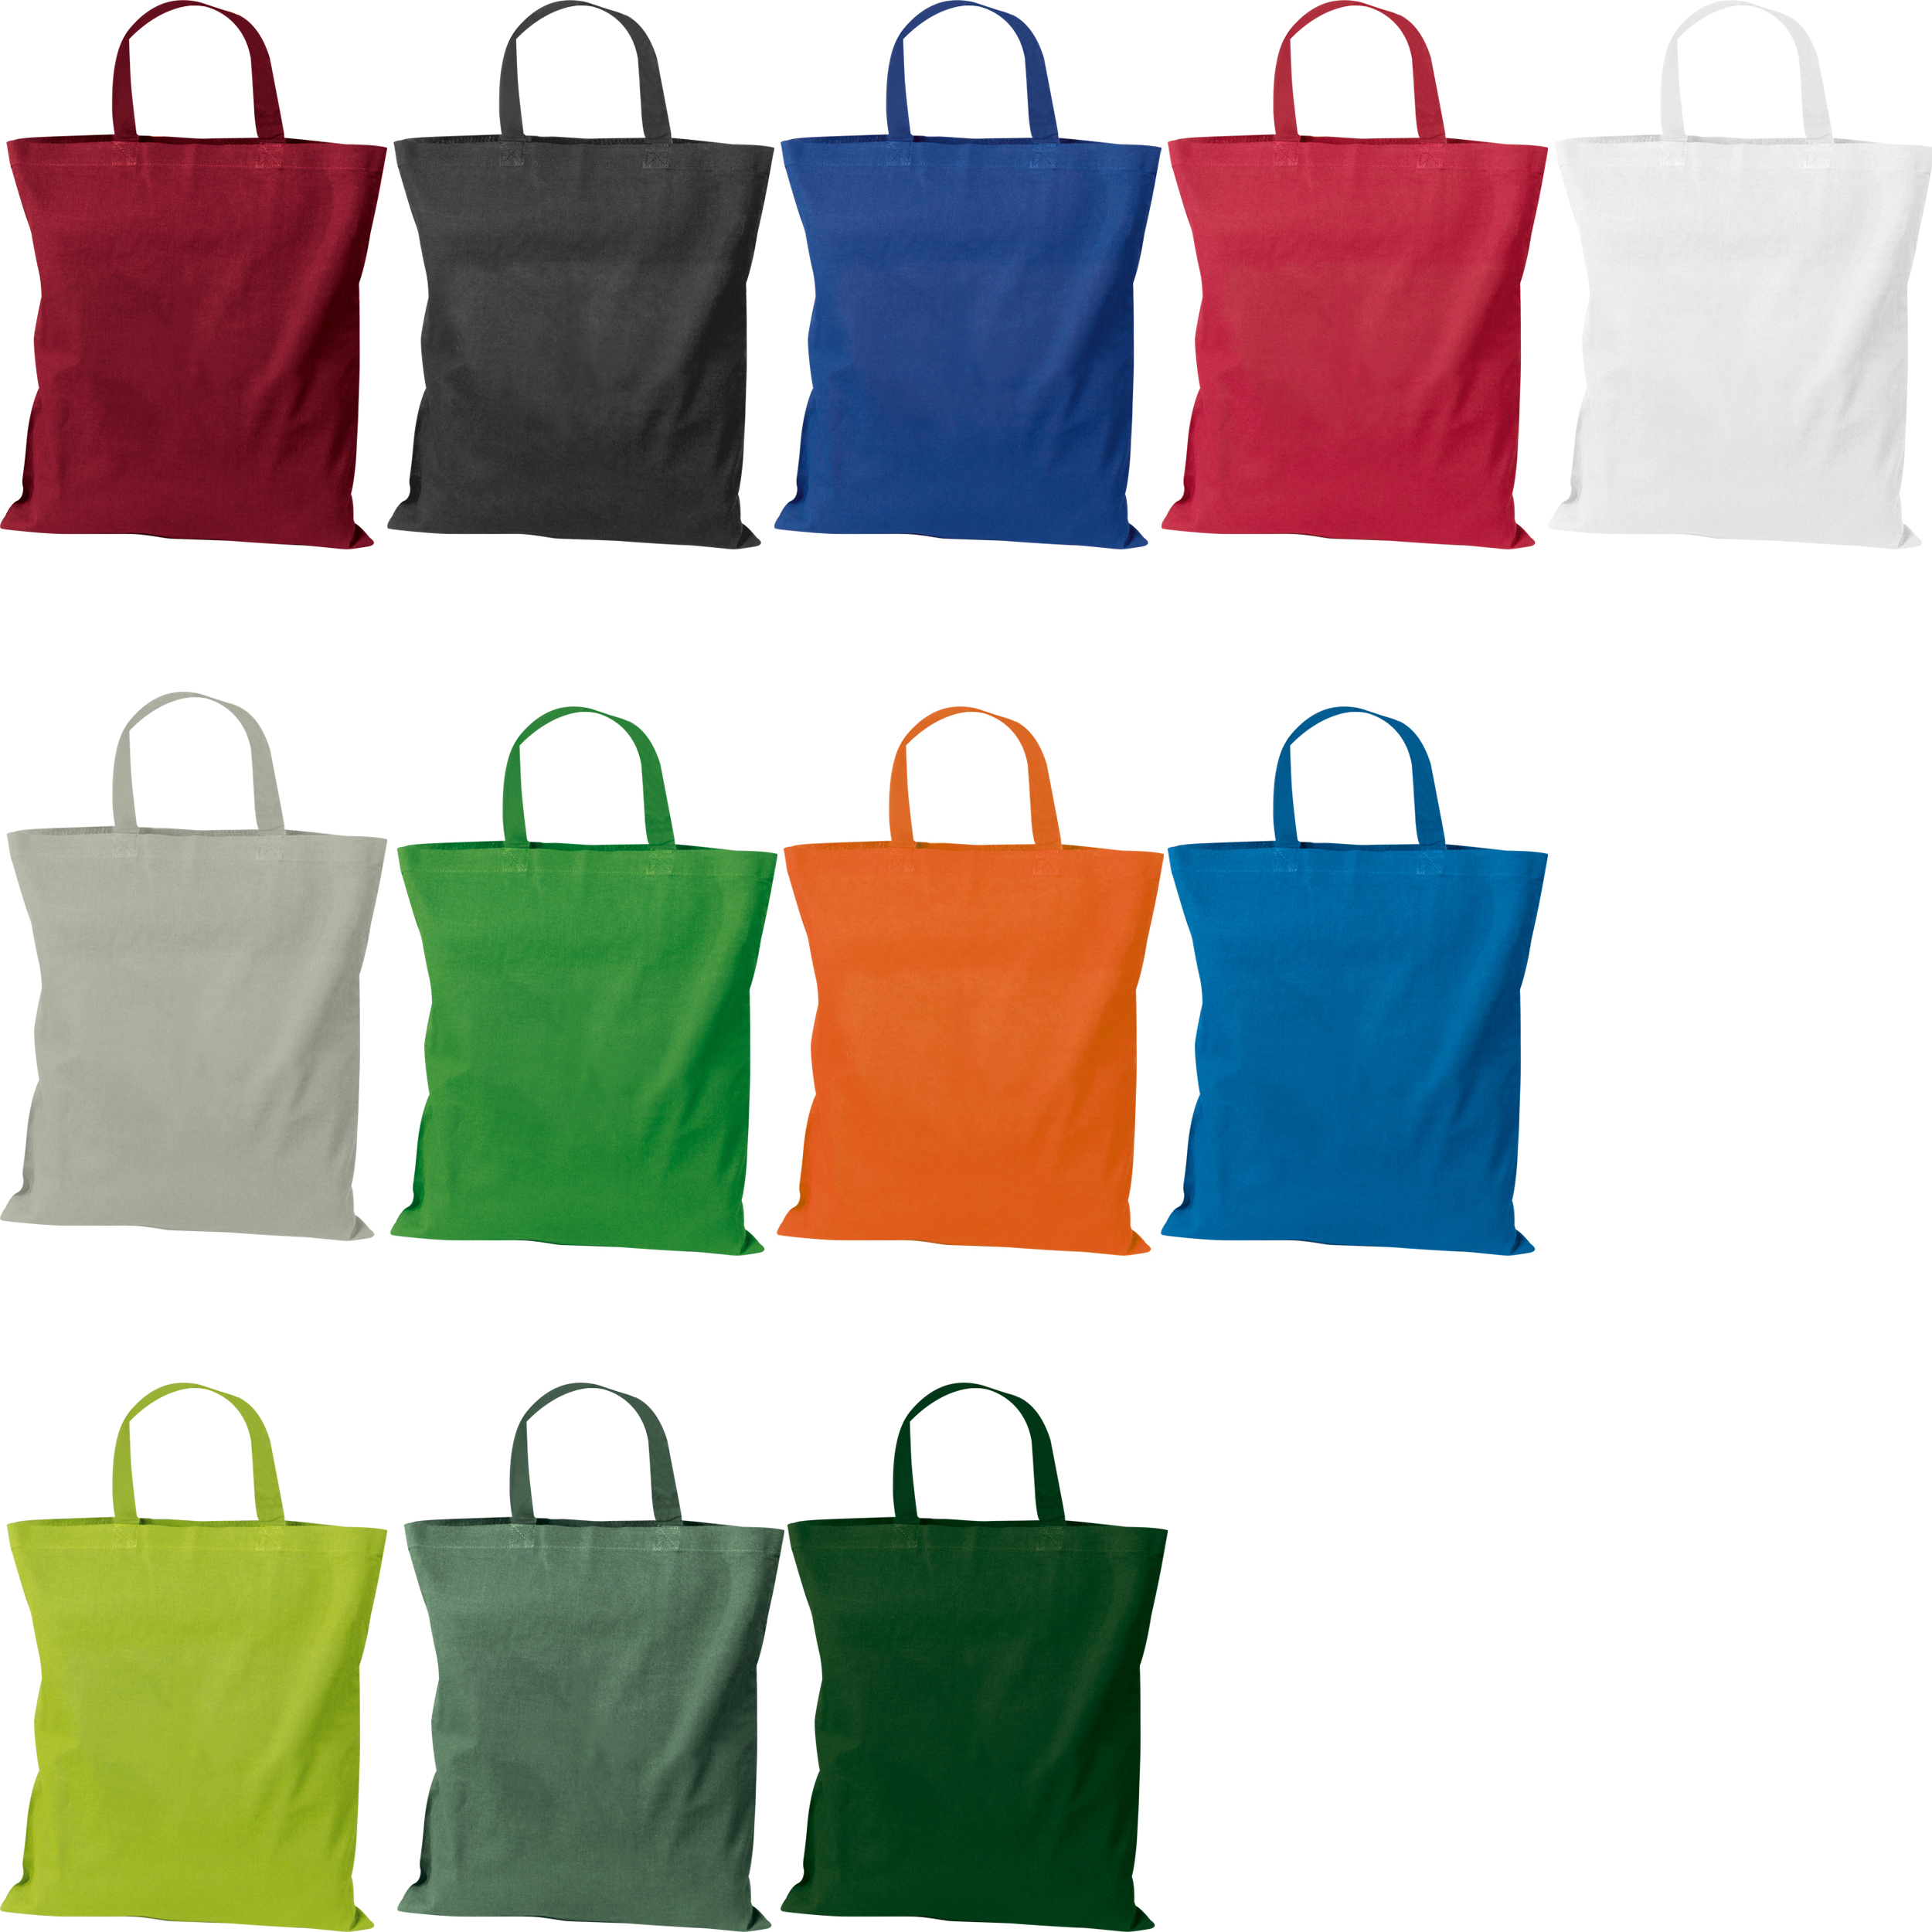 Cotton bag with short handles